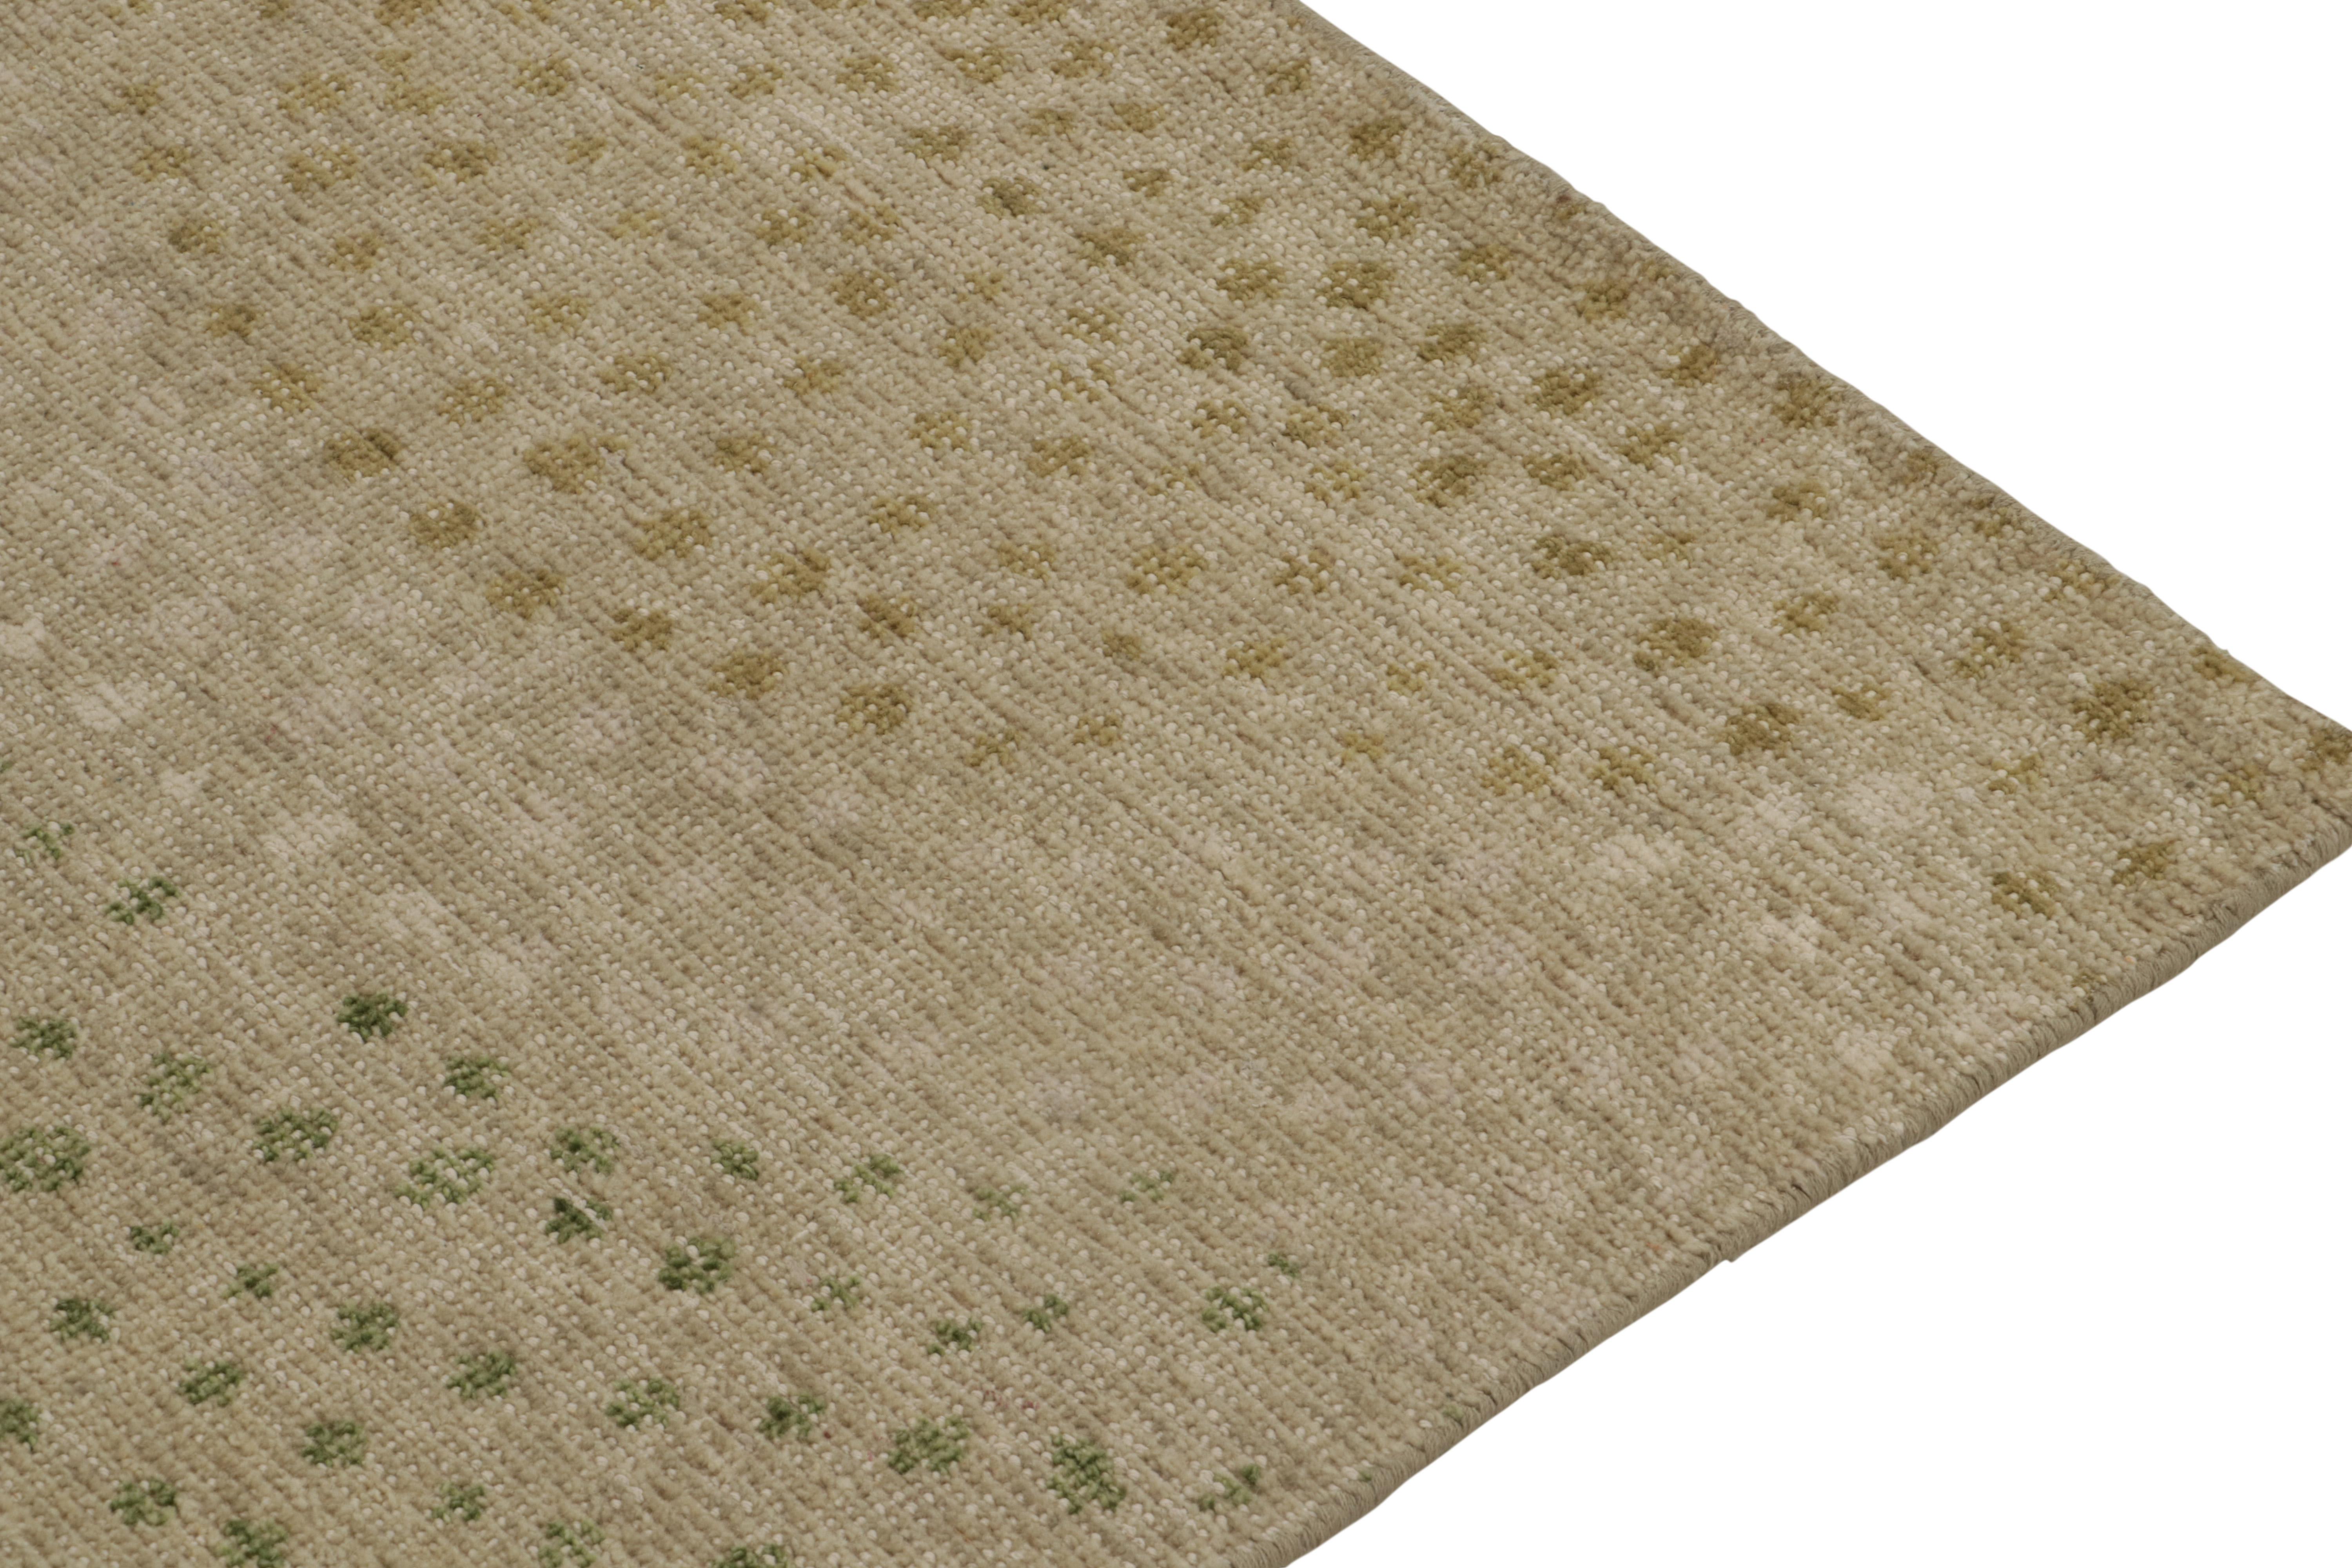 Hand-Knotted Rug & Kilim’s Distressed Style Runner in Beige & Green Abstract Dots Pattern For Sale